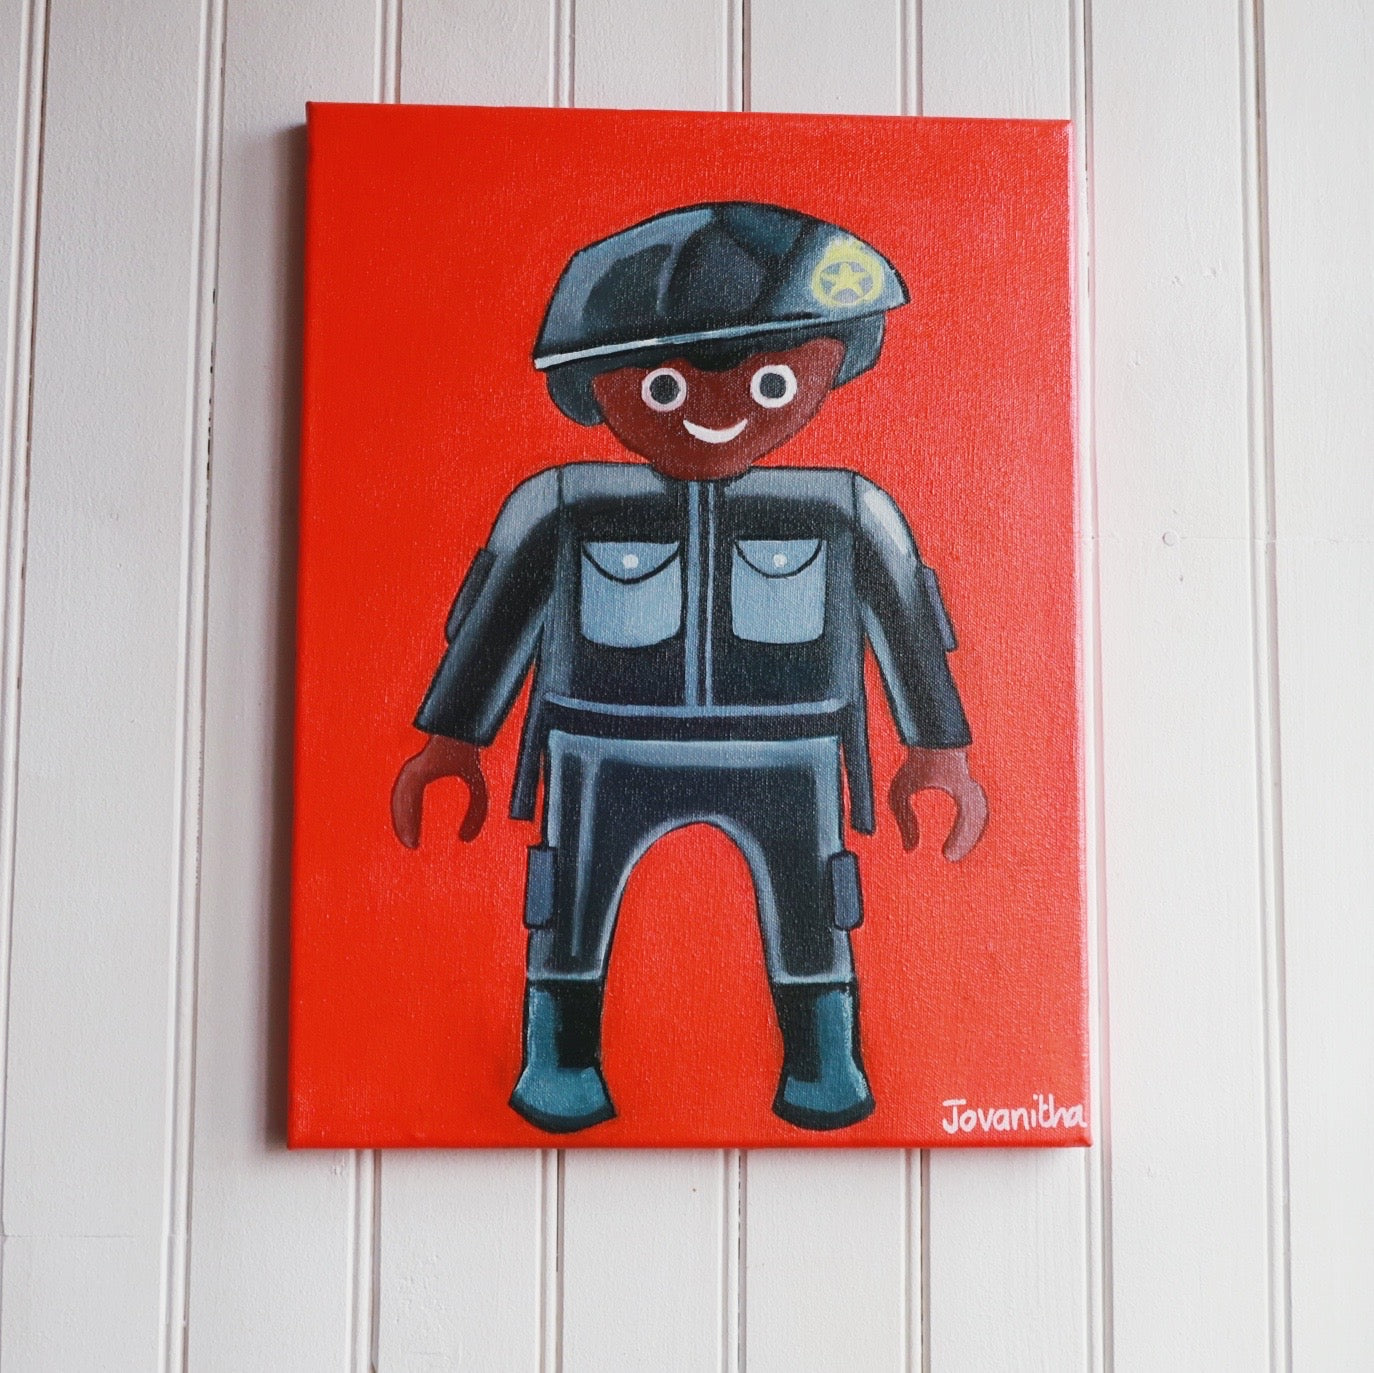 An oil painting of a black policeman Playmobil against an orange background on a white wall